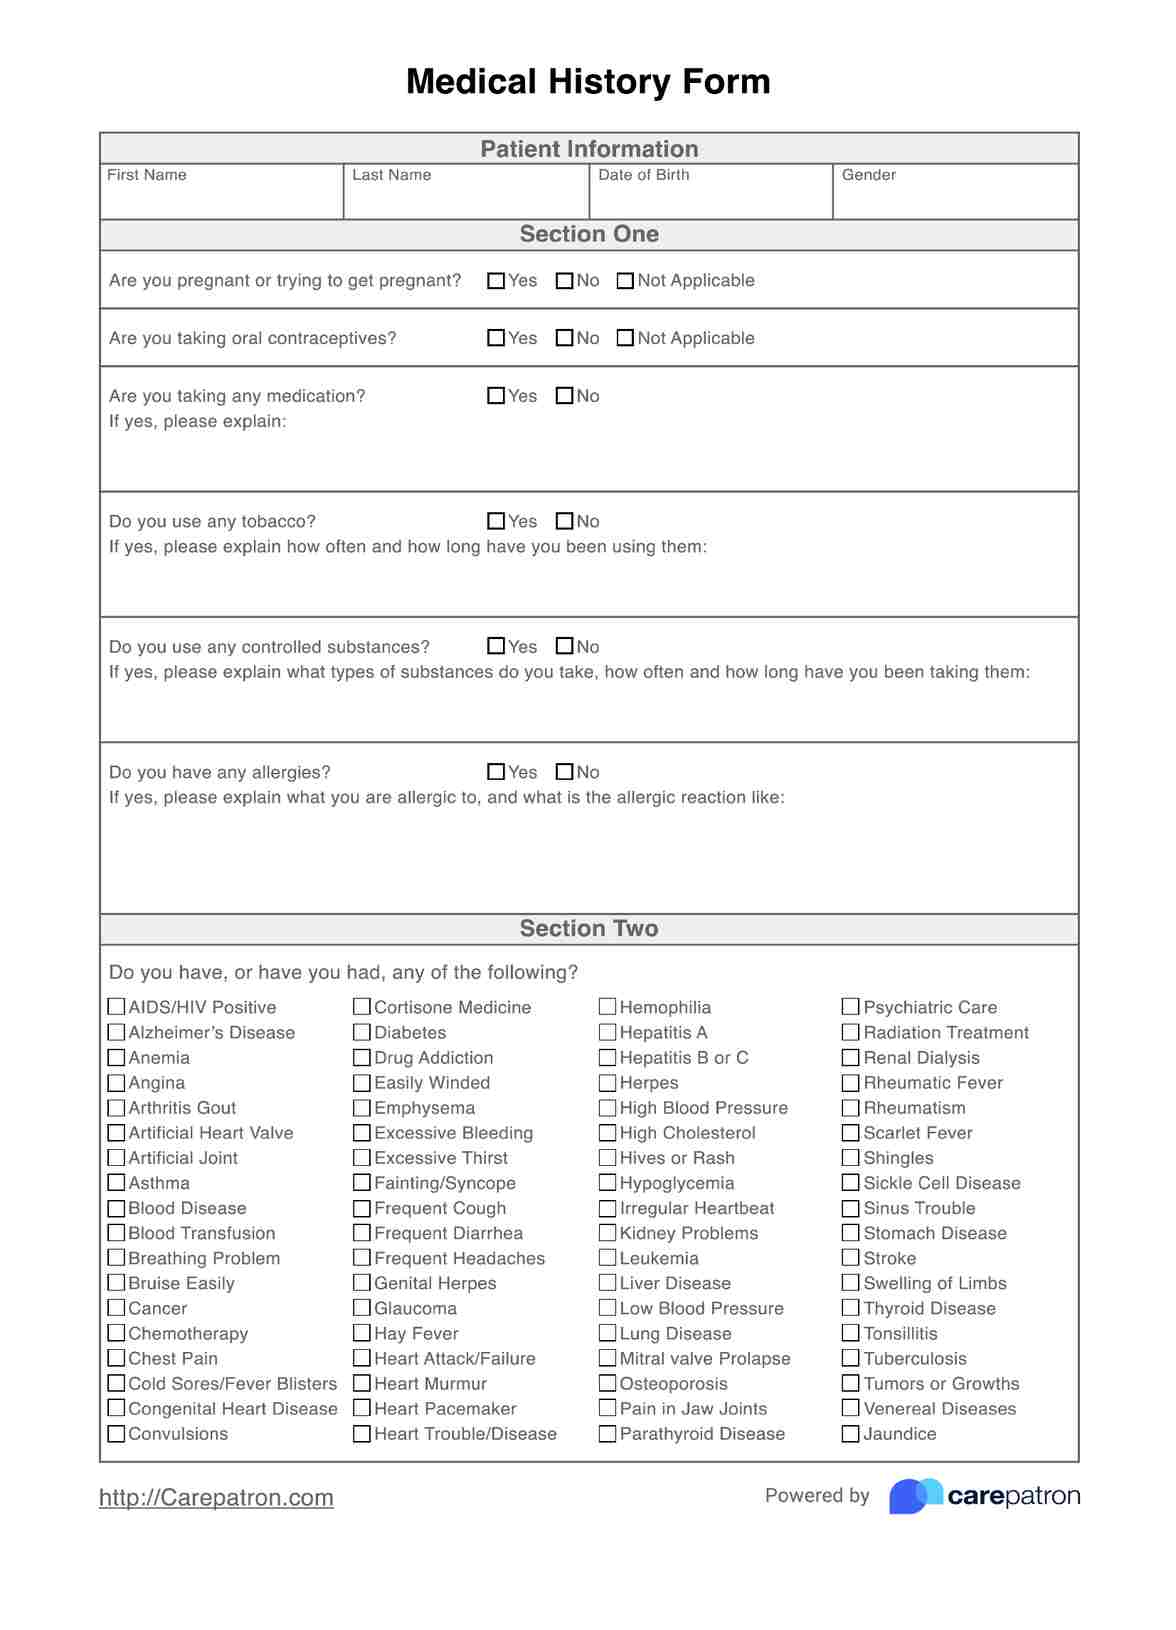 Medical History Form PDF Example